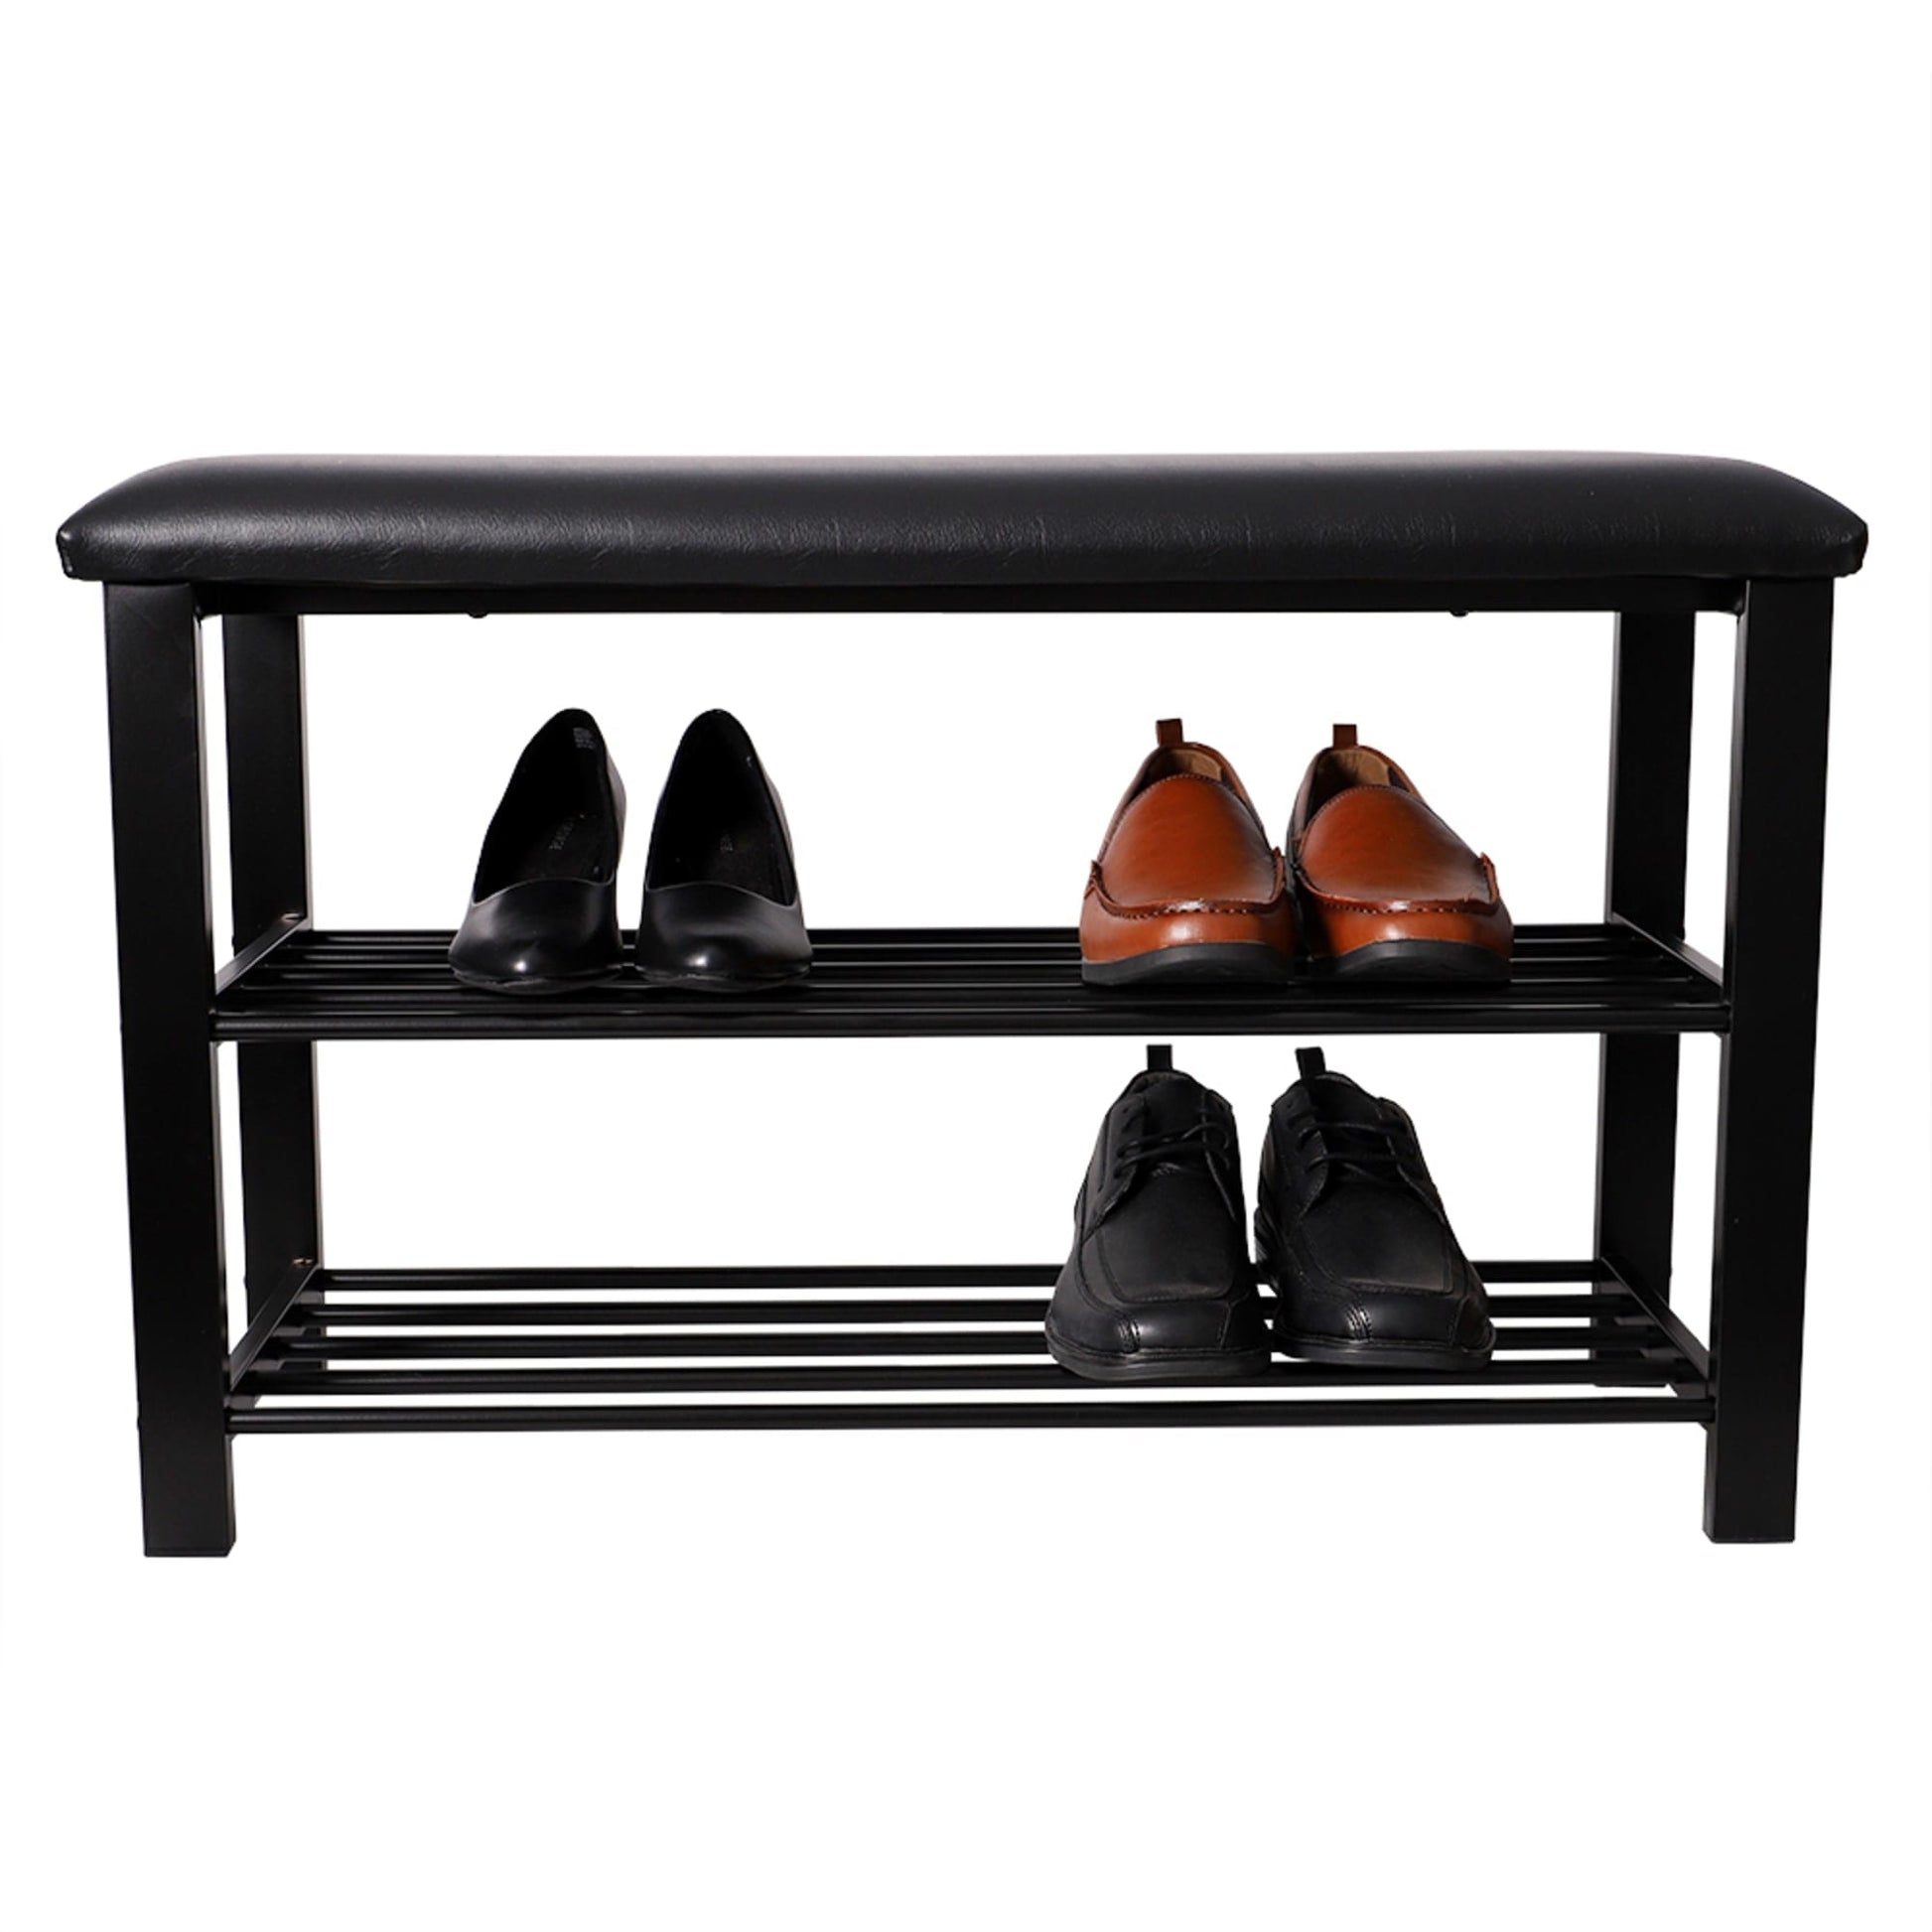 Rustic Style Entryway Shoe Storage Bench Shoe Rack with 2 Tier